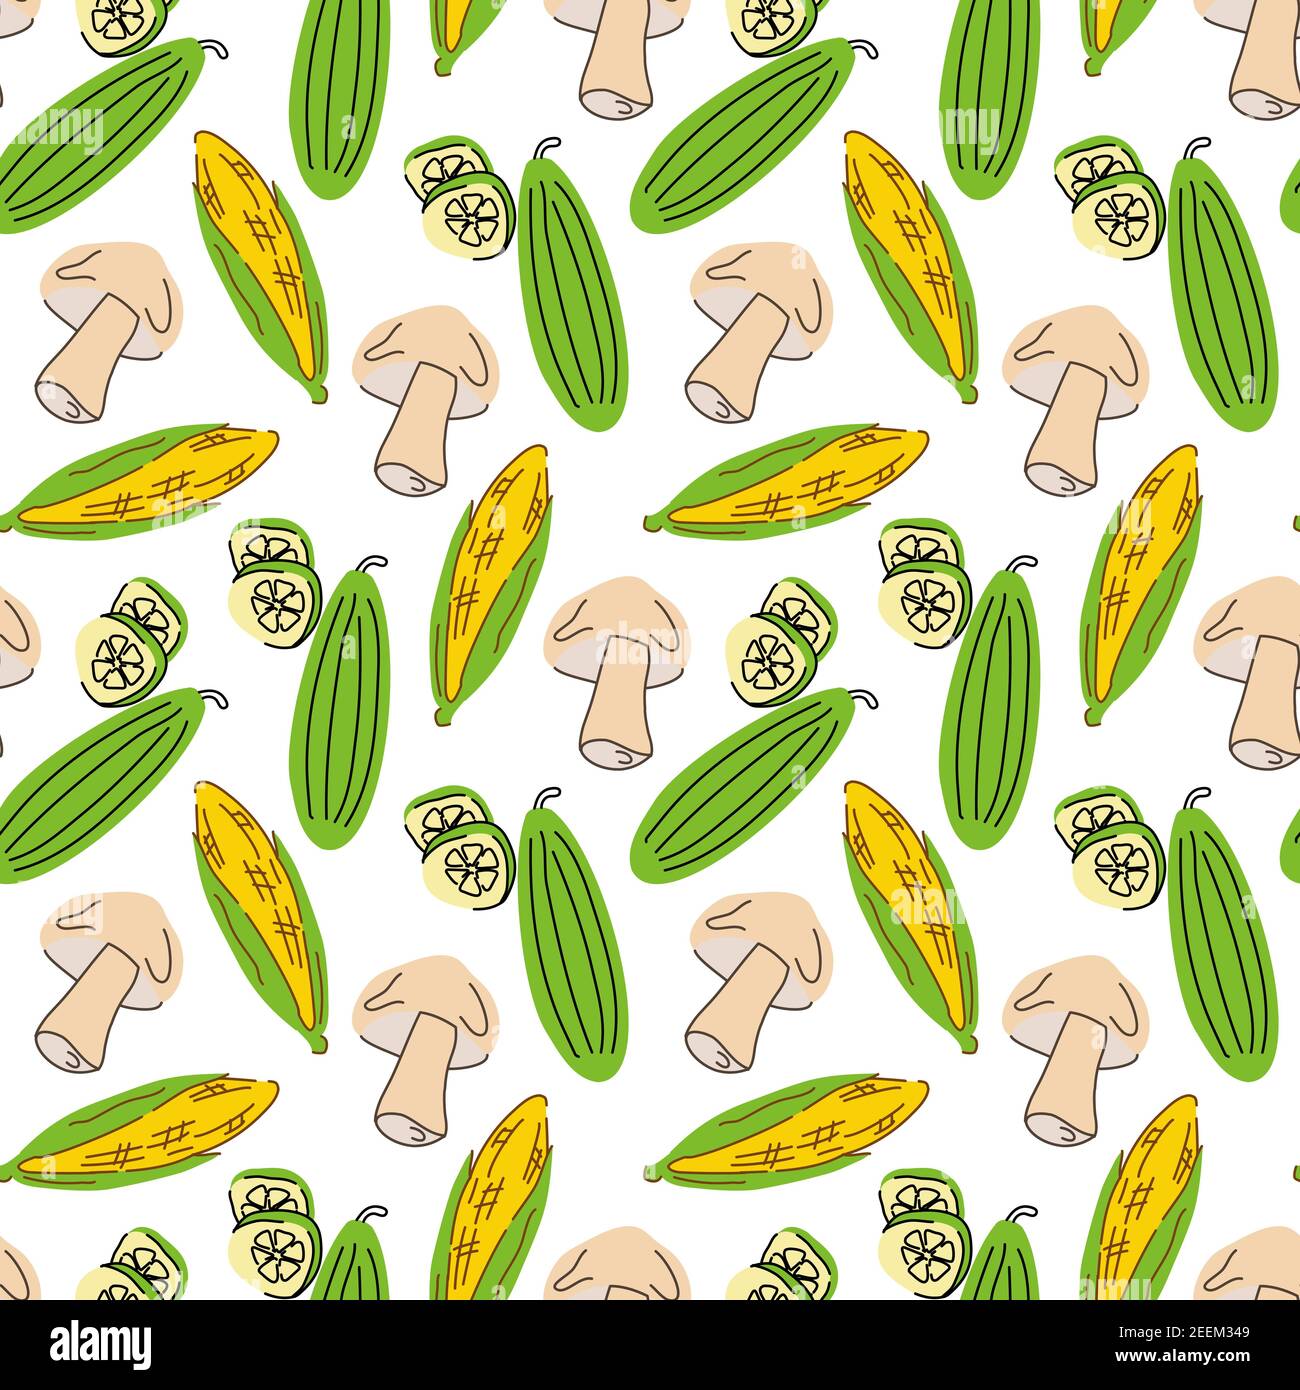 Seamless pattern vegetables with elements of mushrooms, cucumber, corn. Vector illustration Stock Vector